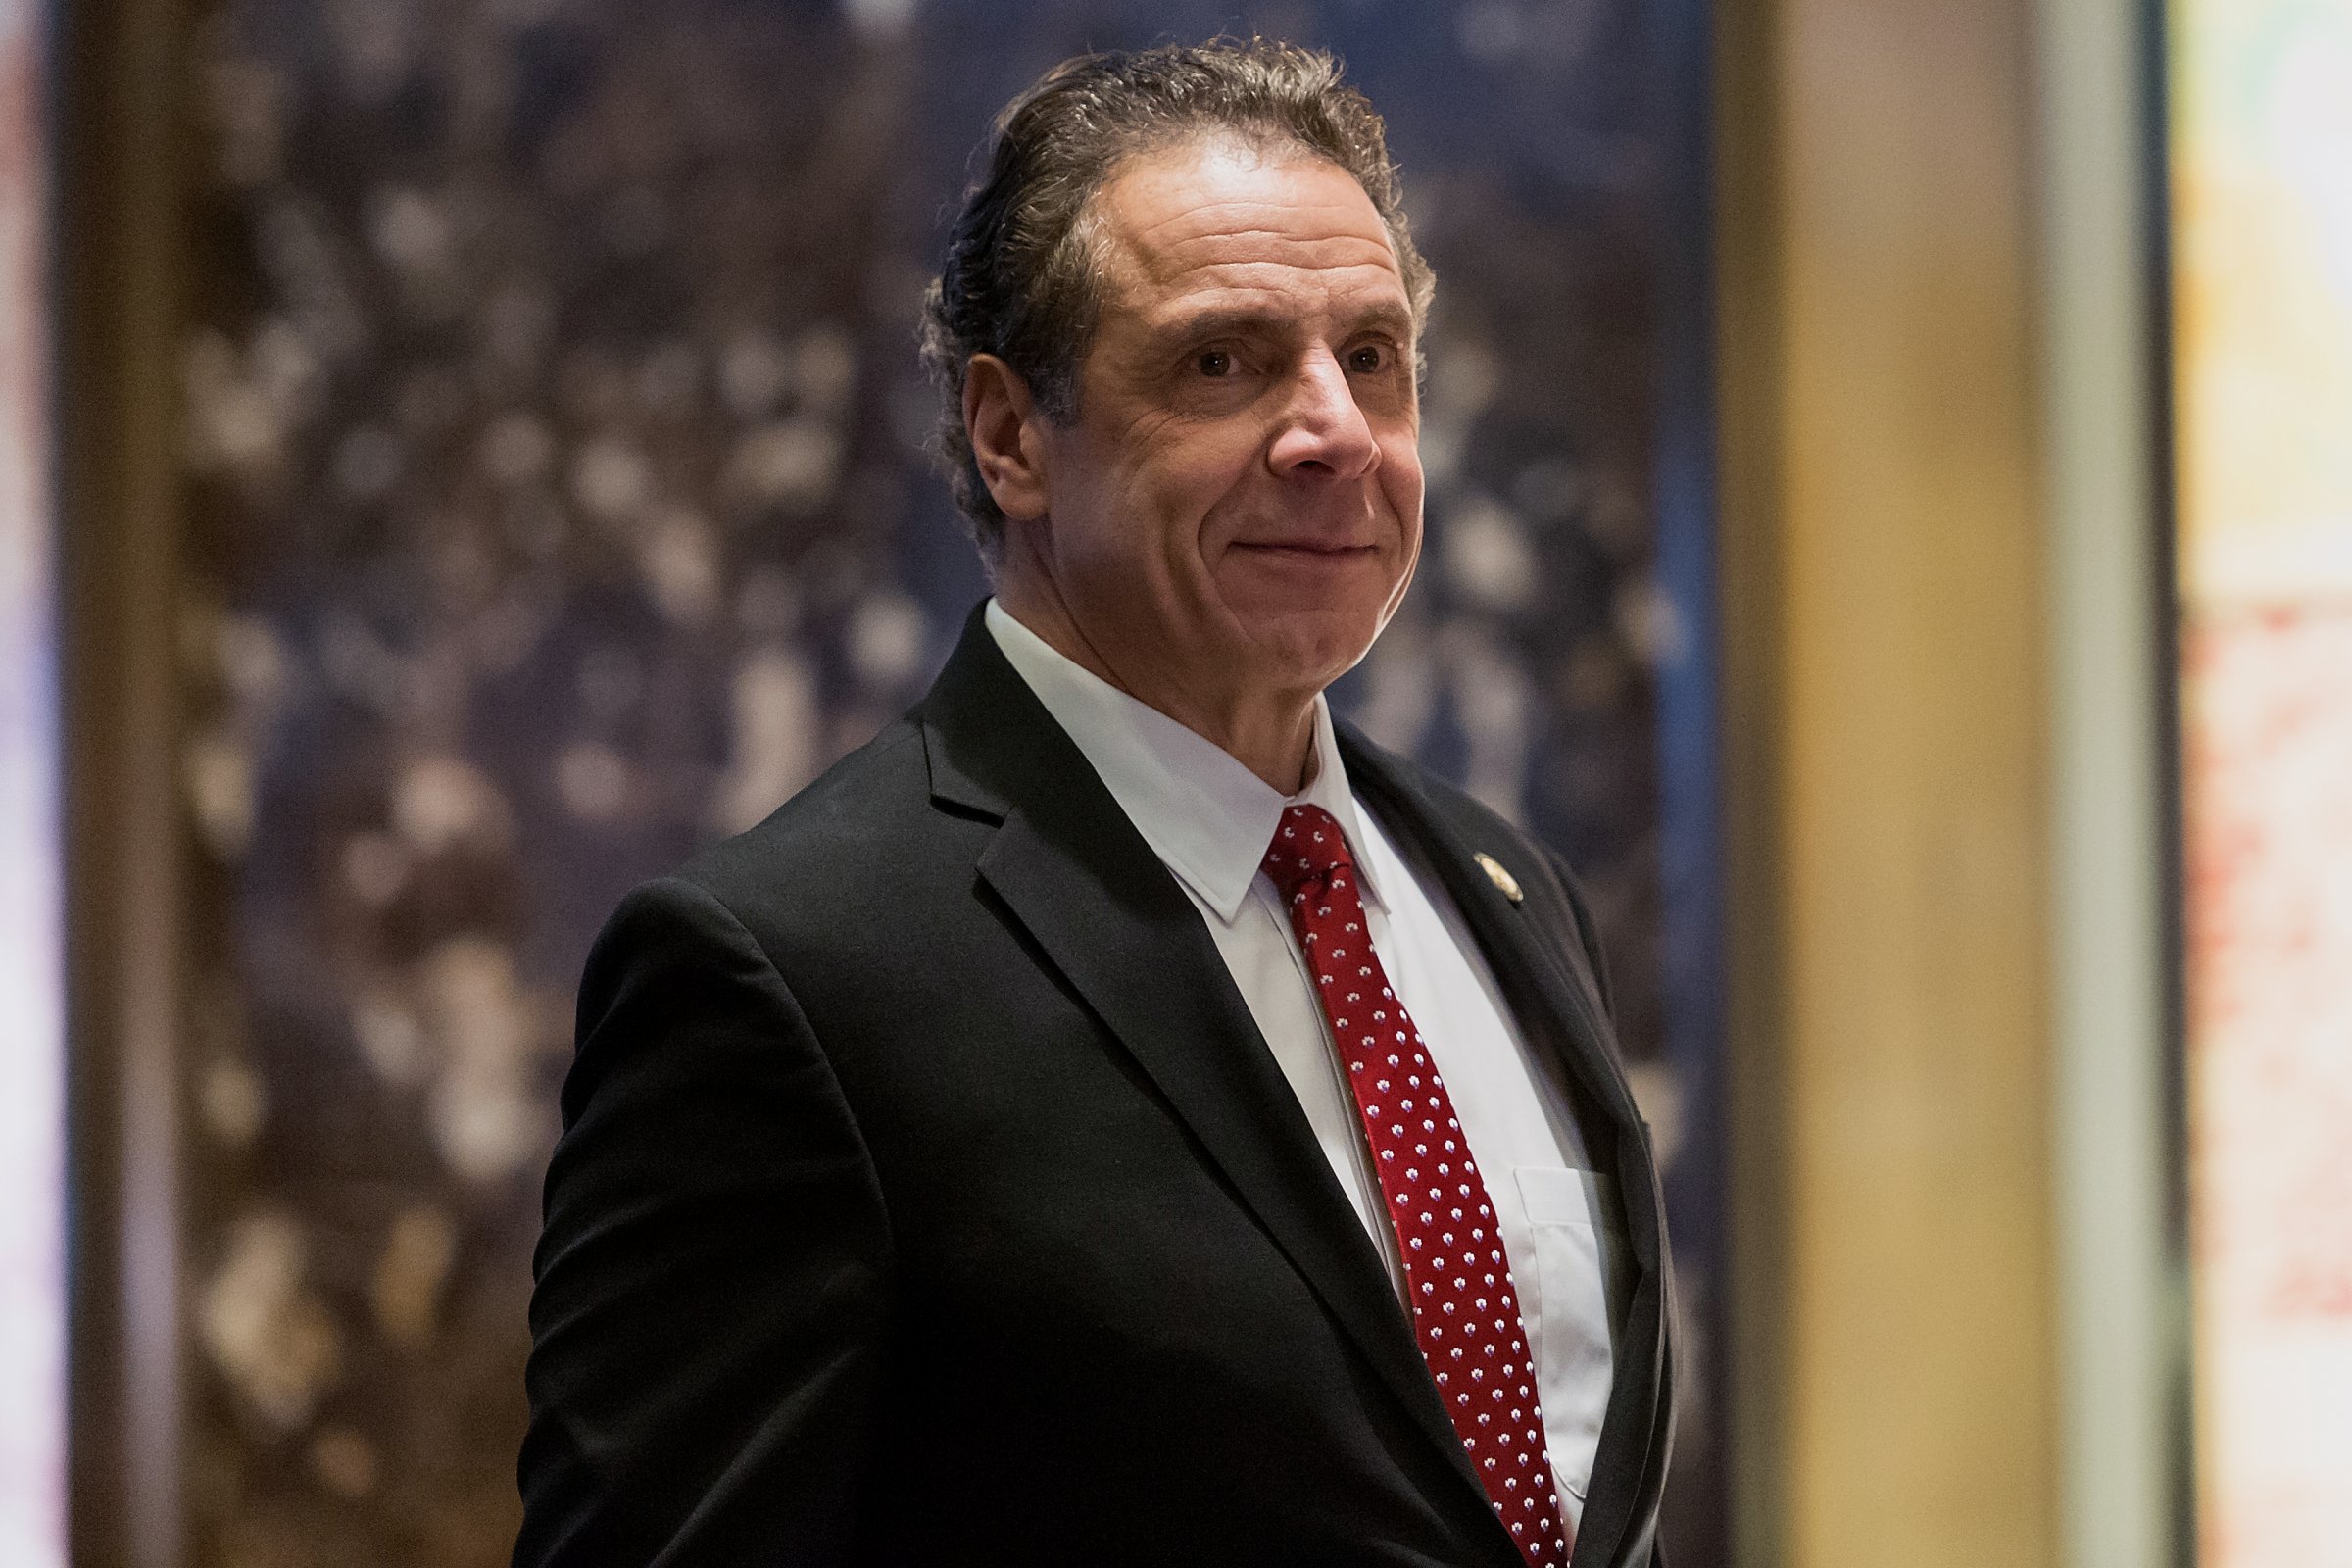 Andrew Cuomo, governor of New York, arrives in the lobby of Trump Tower in New York, on Jan. 18, 2017.